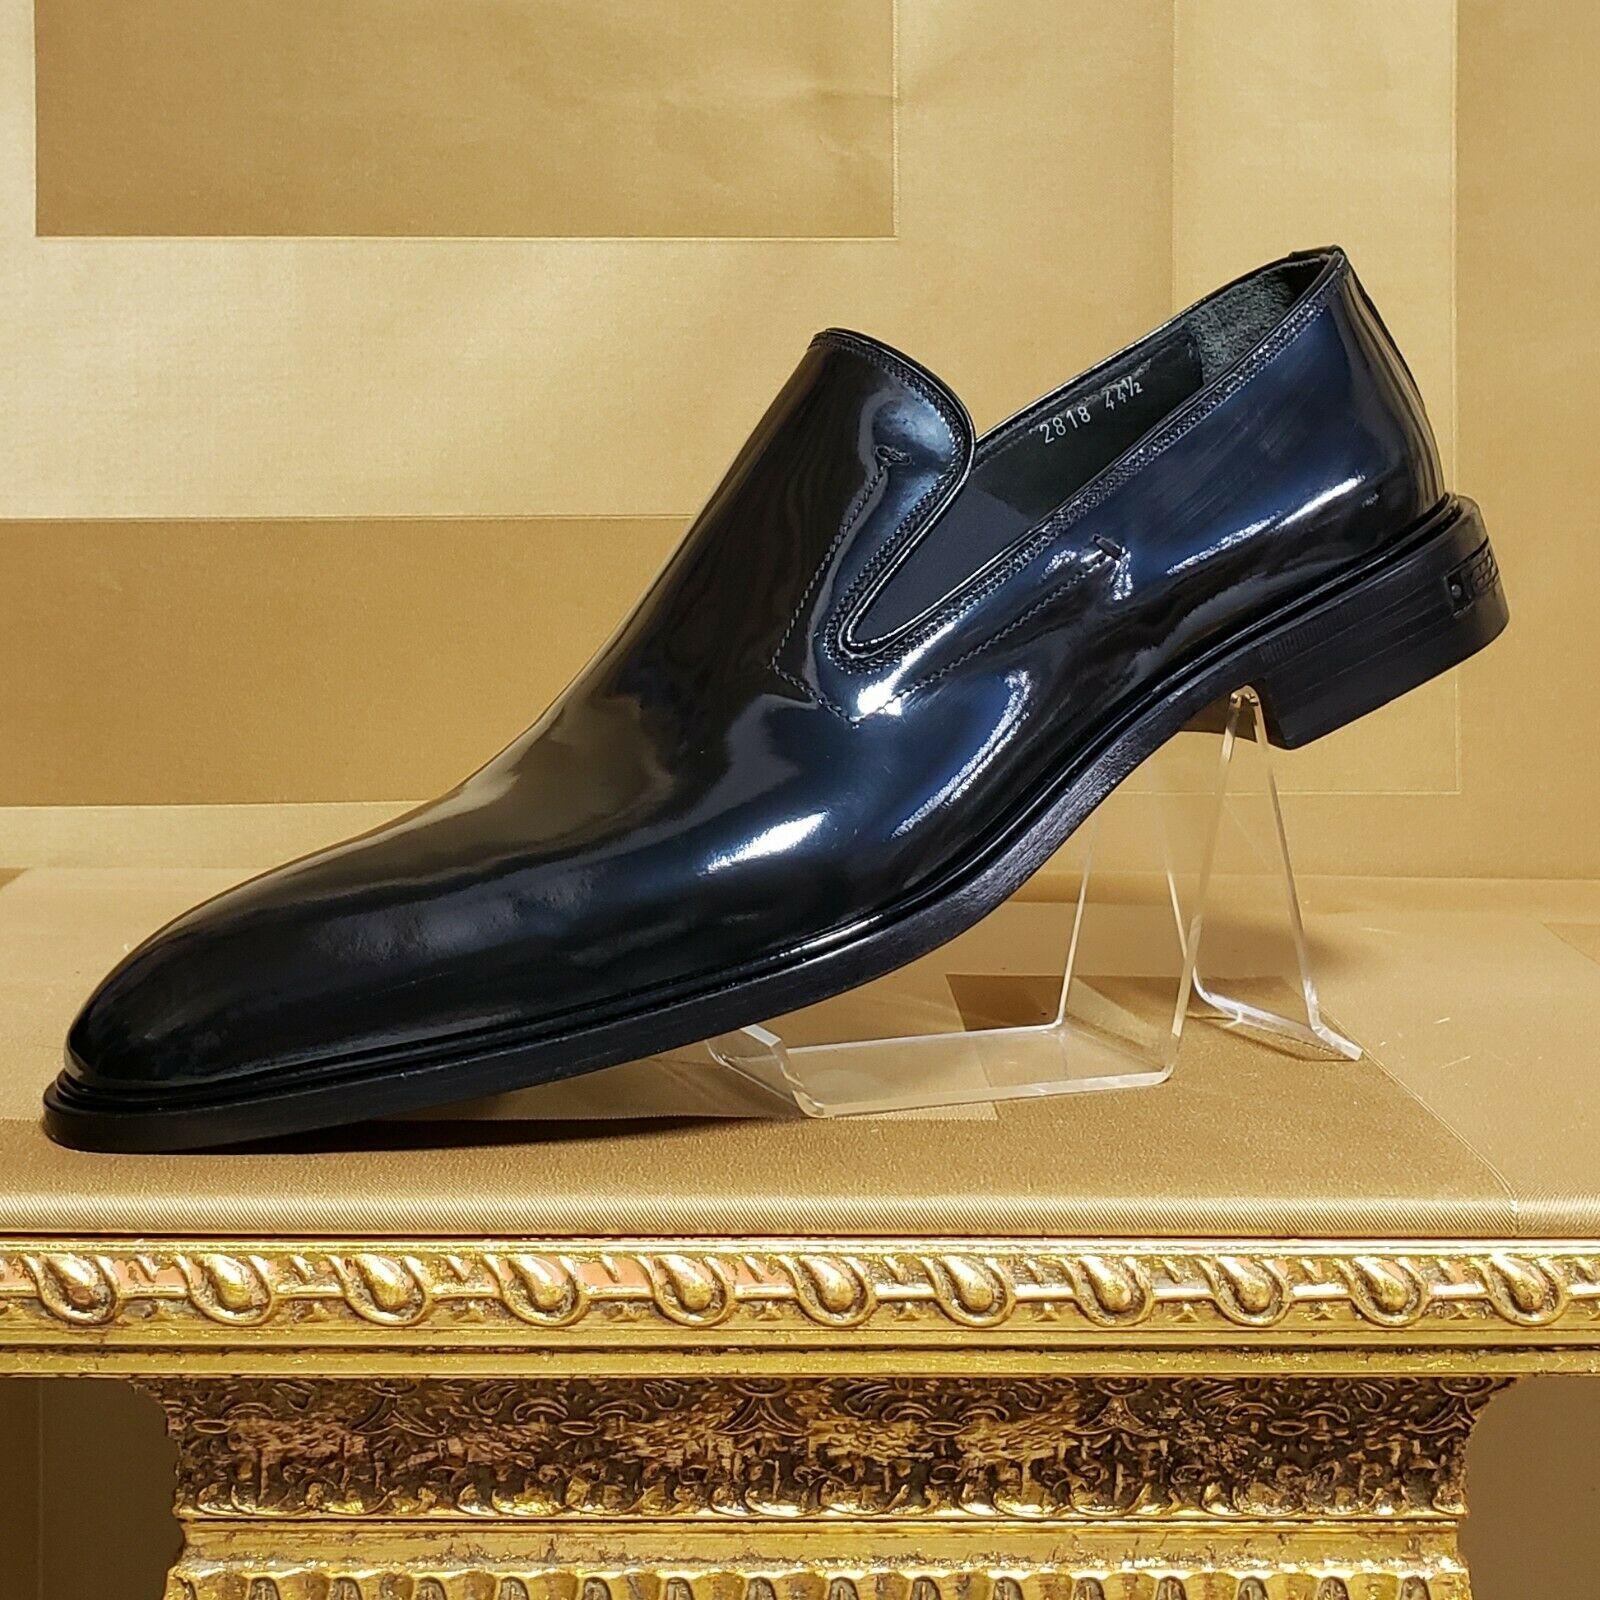  VERSACE



BLACK PATENT LEATHER LOAFER SHOES




Content: patent leather


Lining: 100% leather


Made in Italy


      Italian Size is 44.5 - US 11.5
  insole: 11 3/4